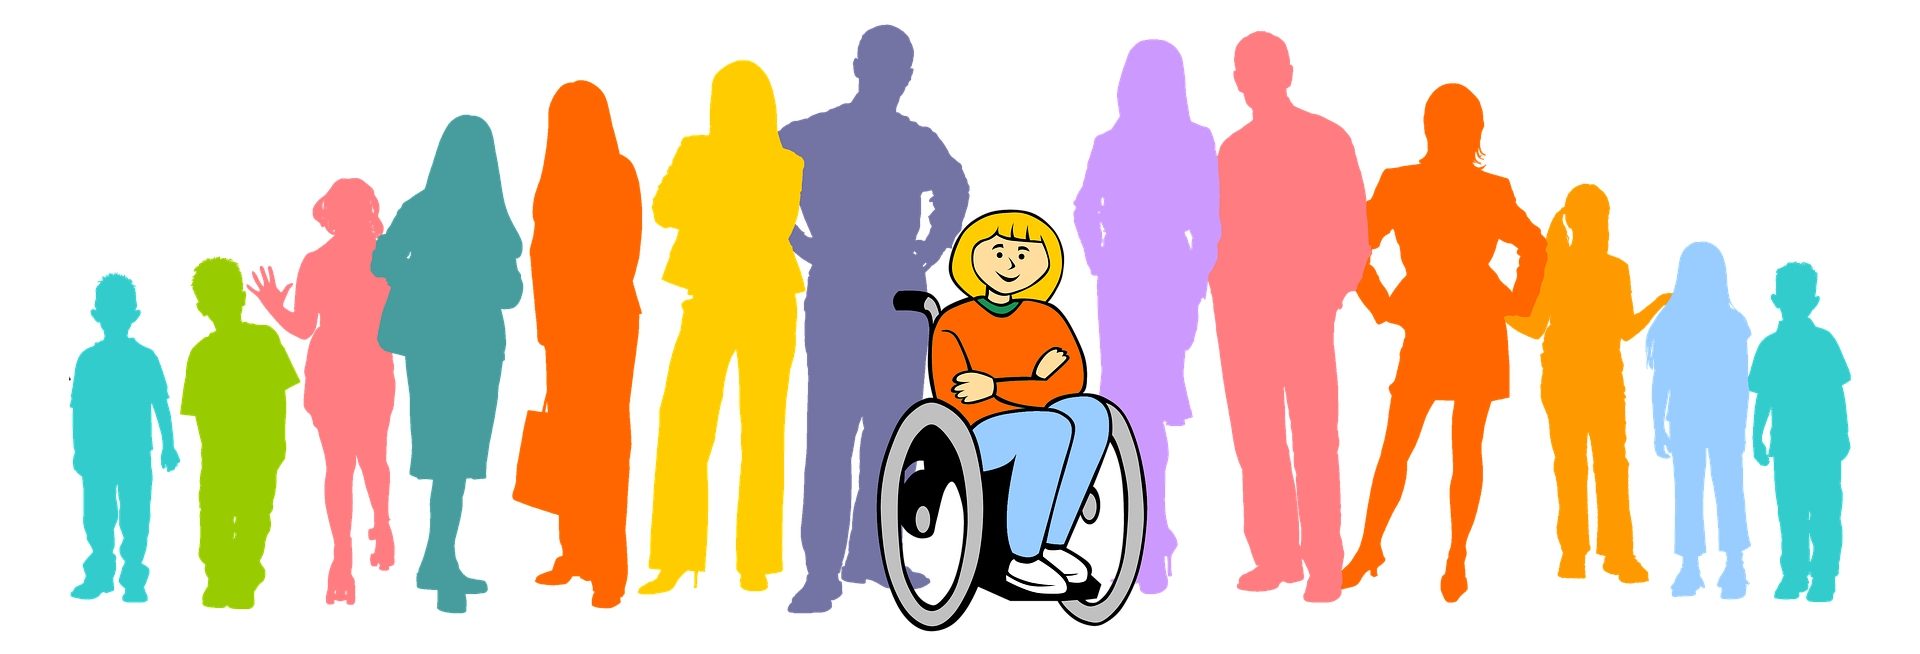 Evidence clipart student. Collection of free disabilities